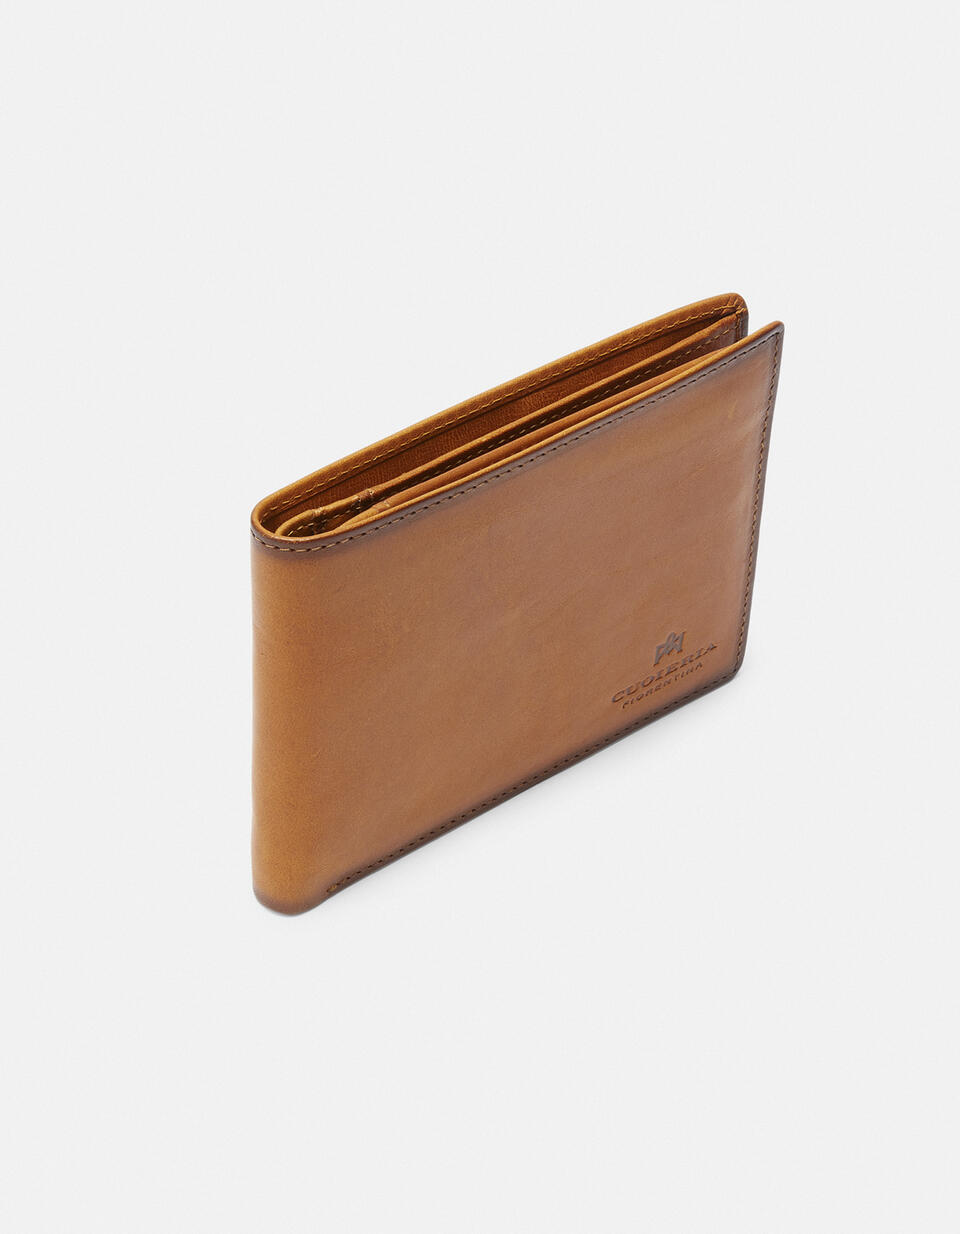 Leather Warm and Color Anti-RFid Wallet - Women's Wallets - Men's Wallets | Wallets  - Women's Wallets - Men's Wallets | WalletsCuoieria Fiorentina